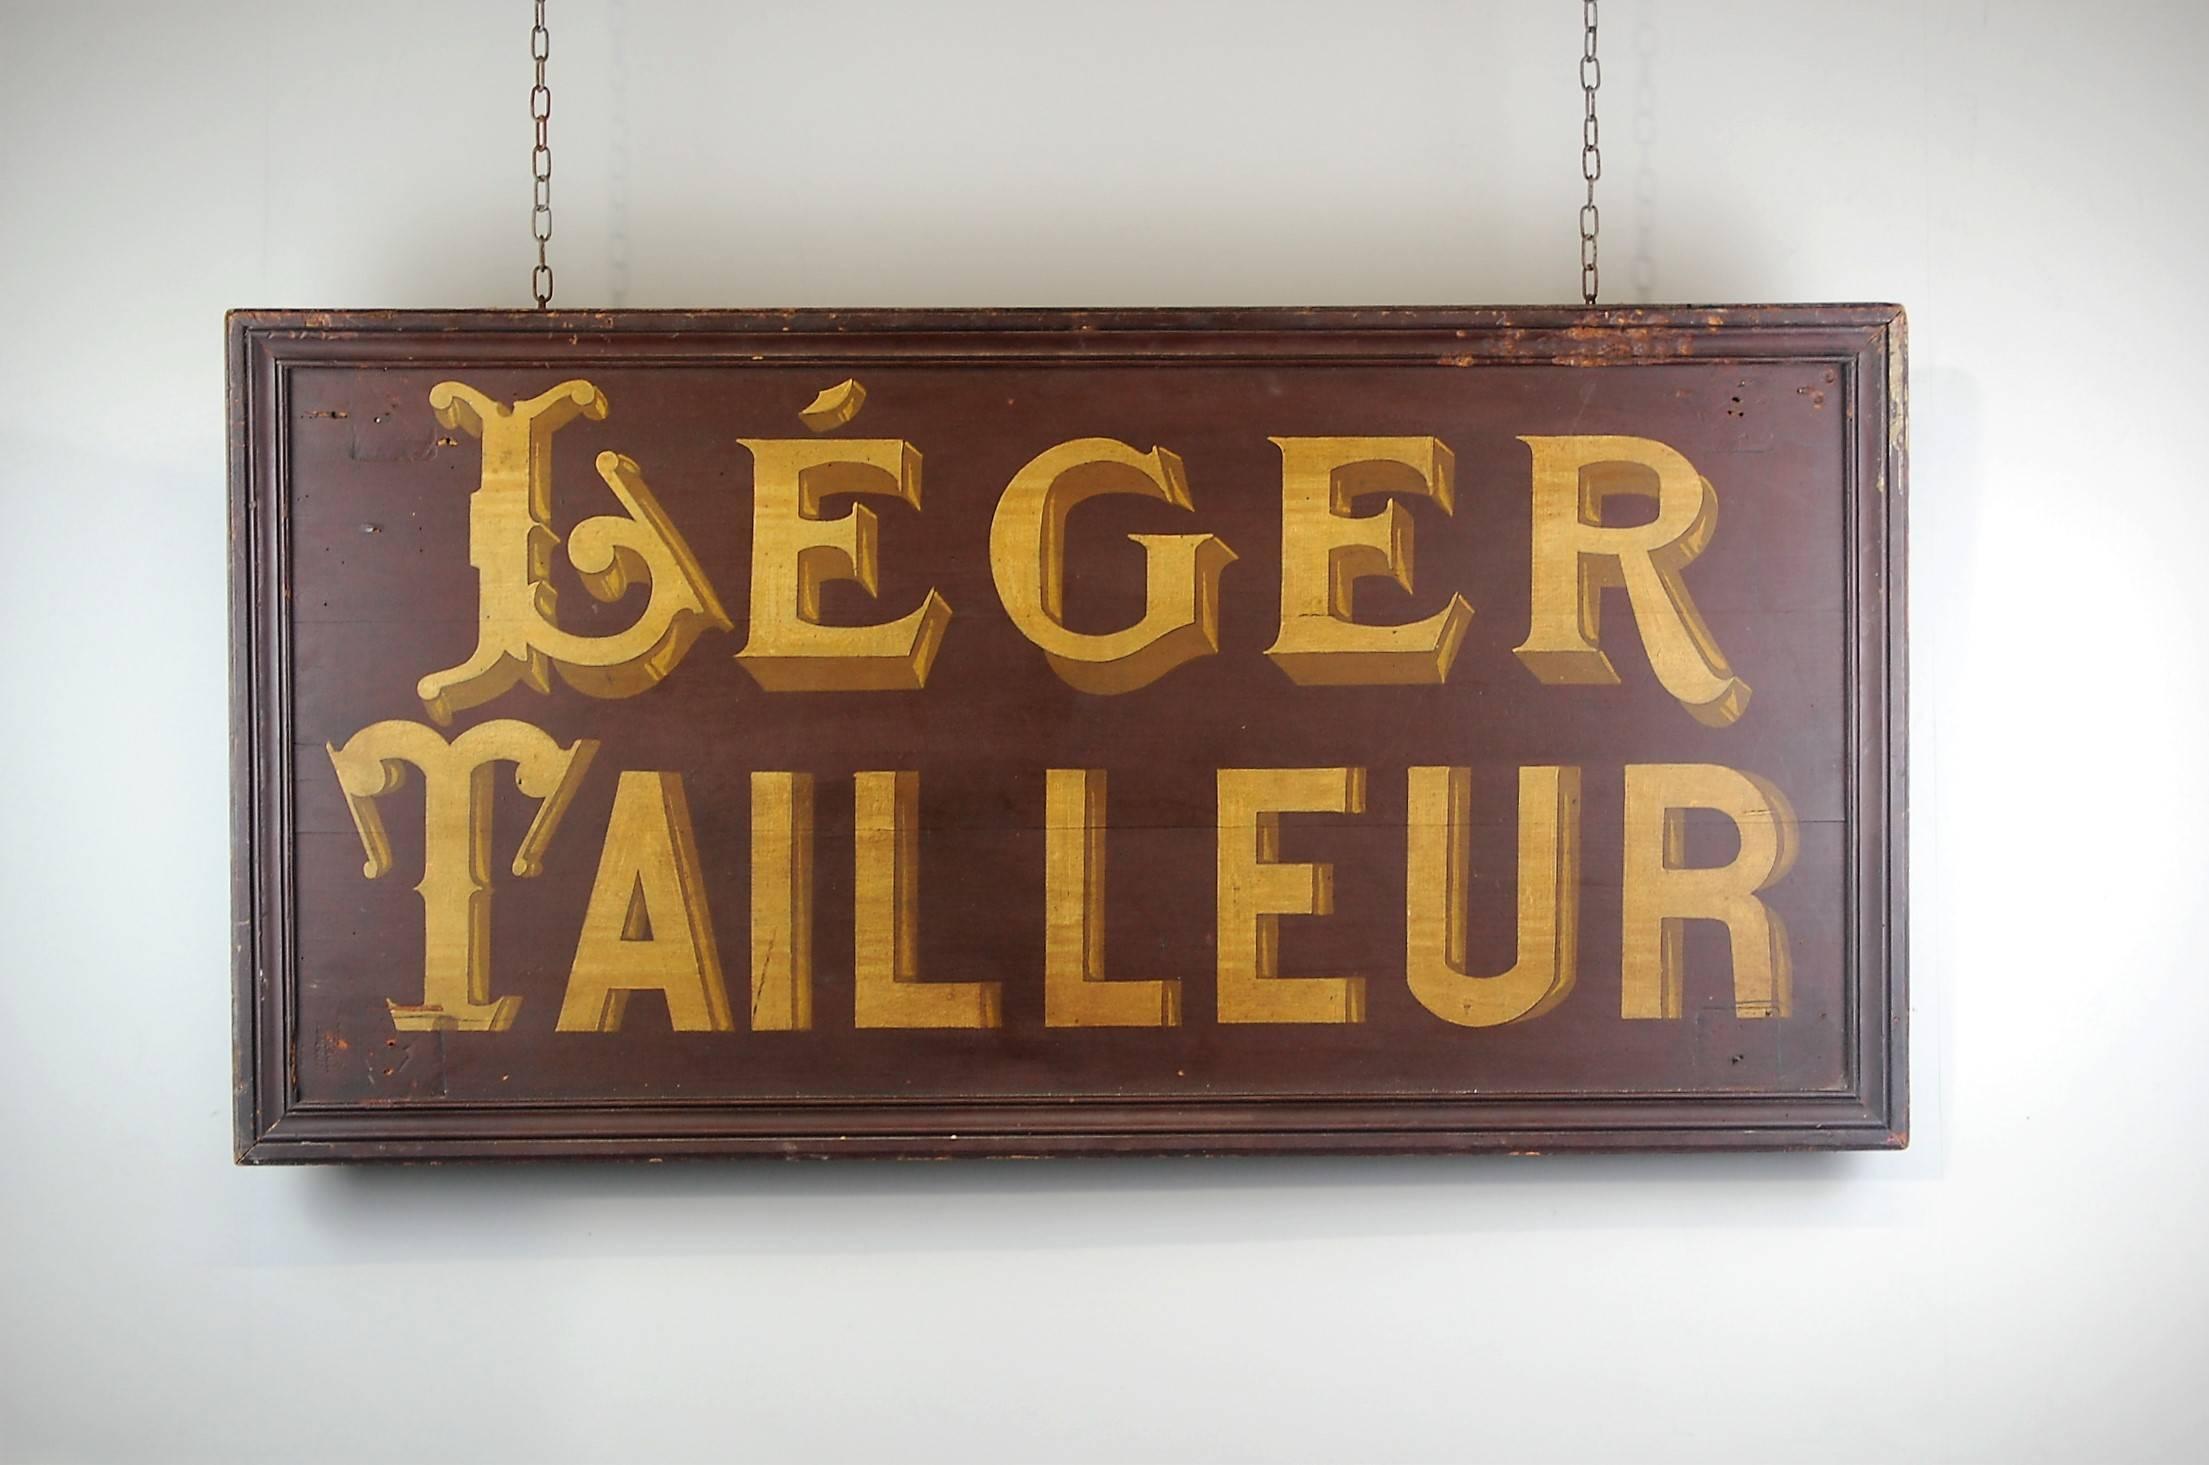 Wonderful large Tailors trade sign, hand-painted on wood. Decadent gold lettering, Paris, France, circa 1920.